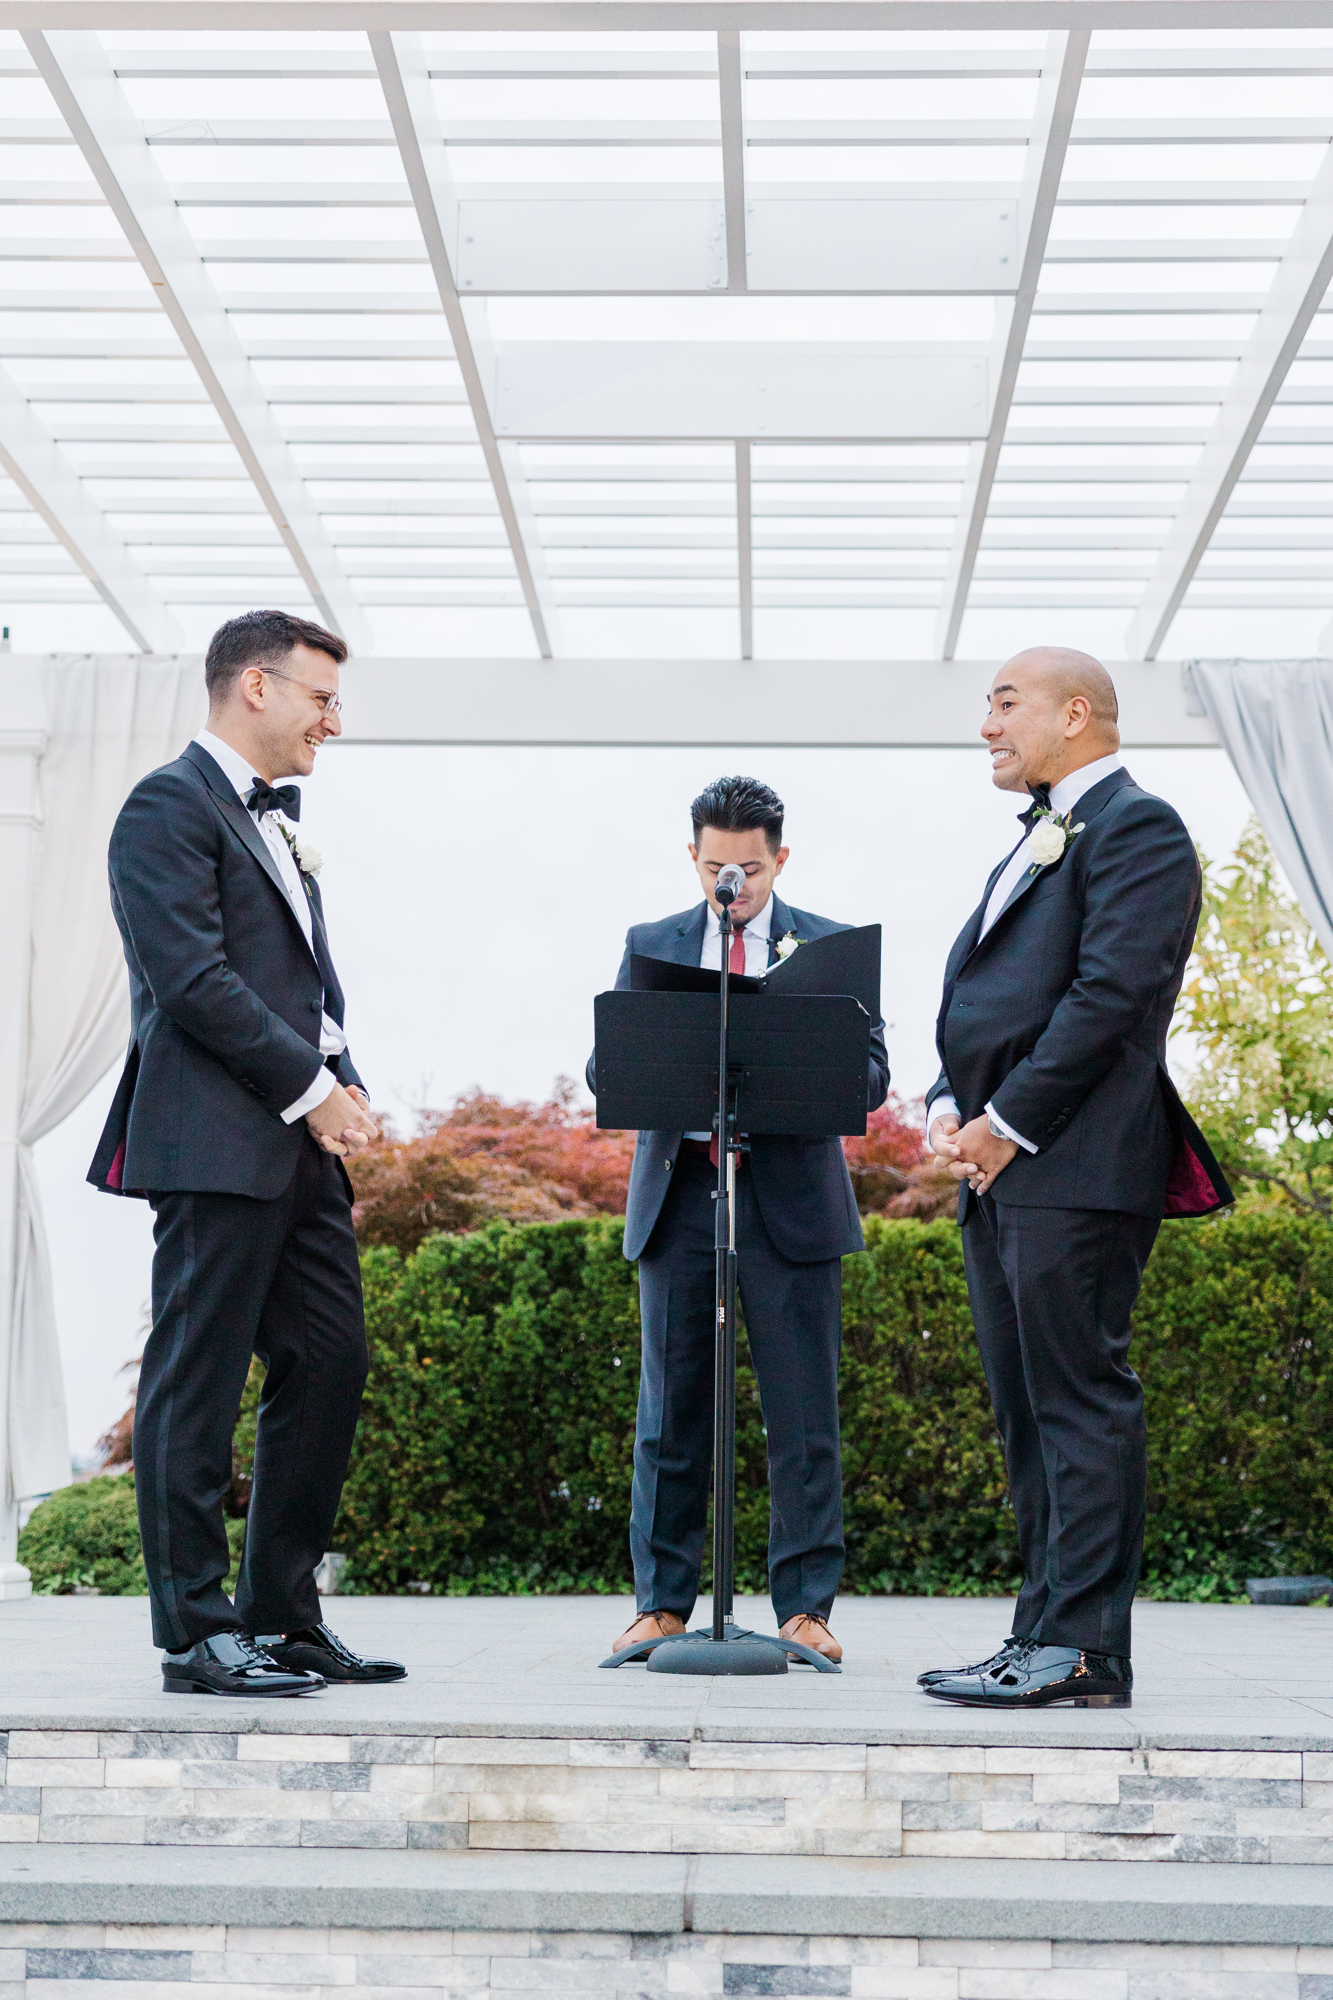 Awesome Marina Del Rey Wedding in The Bronx